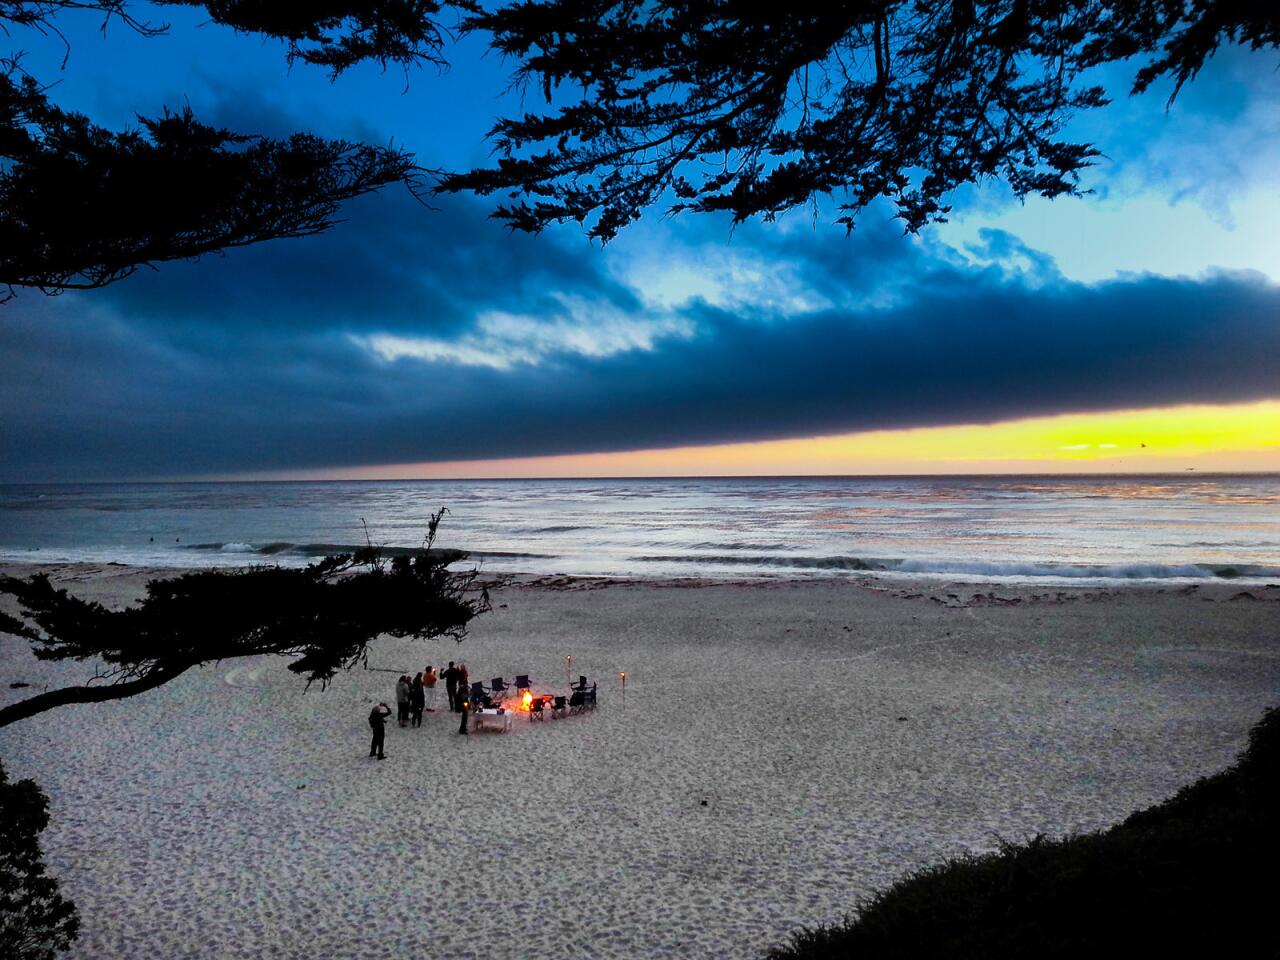 Visitors cant resist the seaside setting. Other popular sights in Carmel-by-the-Sea are the rustic Anglophile architecture, the legion of art galleries and the mission (where Father Junípero Serra is buried).